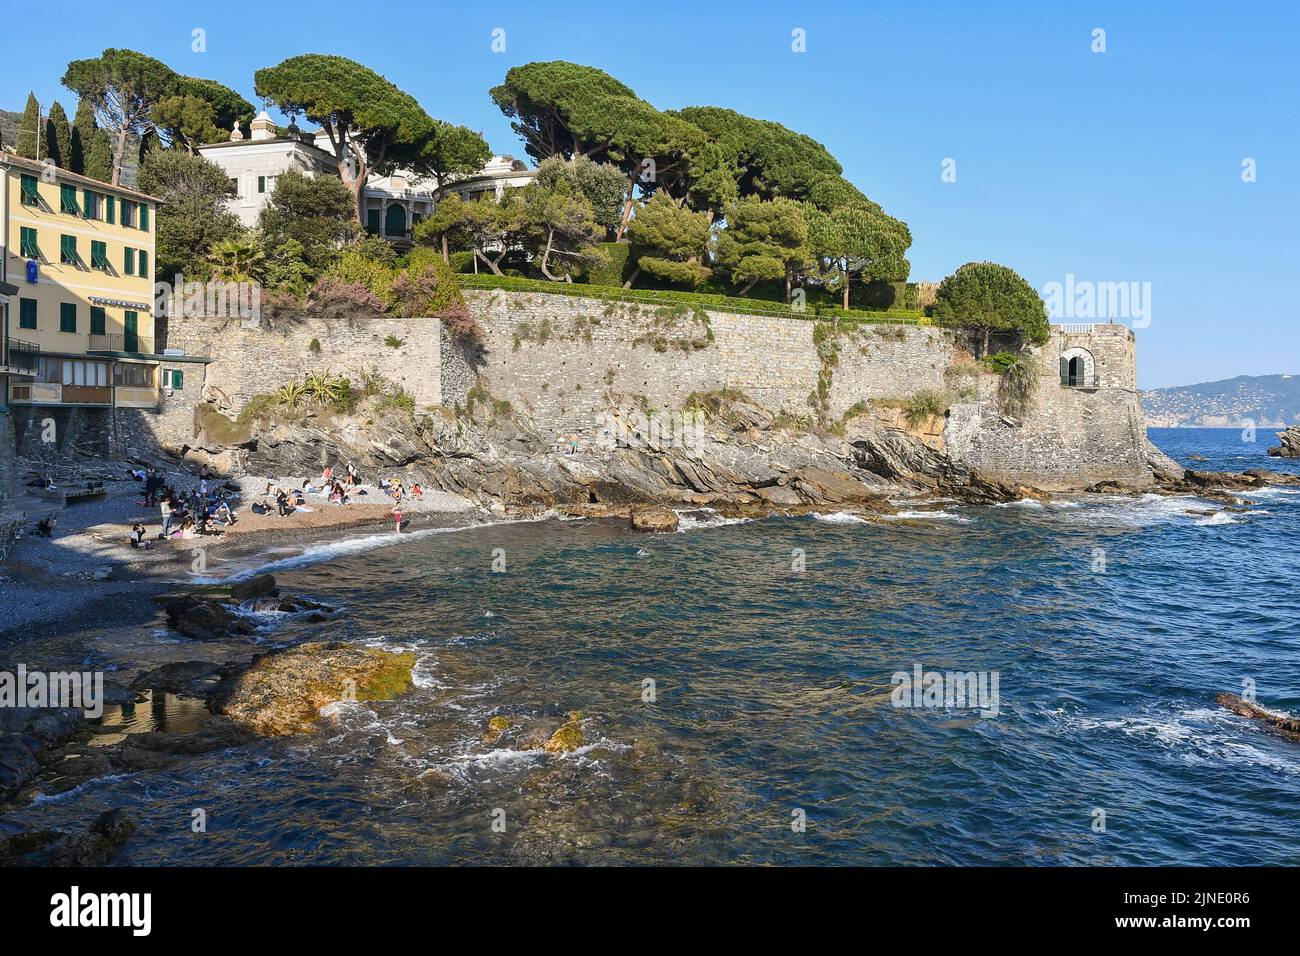 View of the small beach of Capolungo, neighborhood by the sea where the Anita Garibaldi Promenade ends, with holiday villas on the cliff, Nervi, Genoa Stock Photo